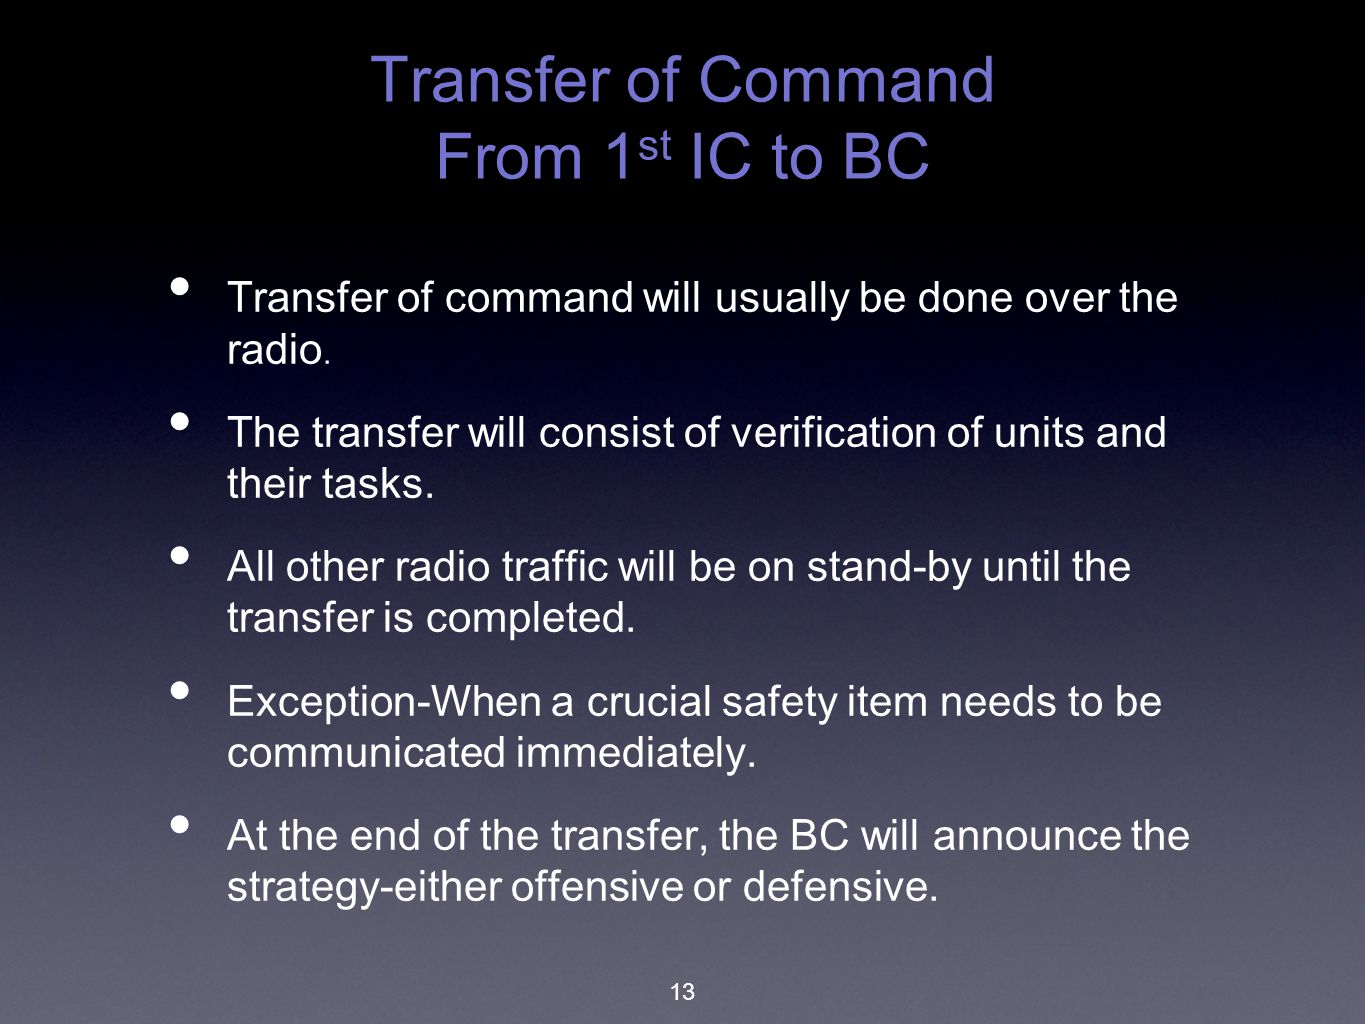 Transfer of Command From 1st IC to BC